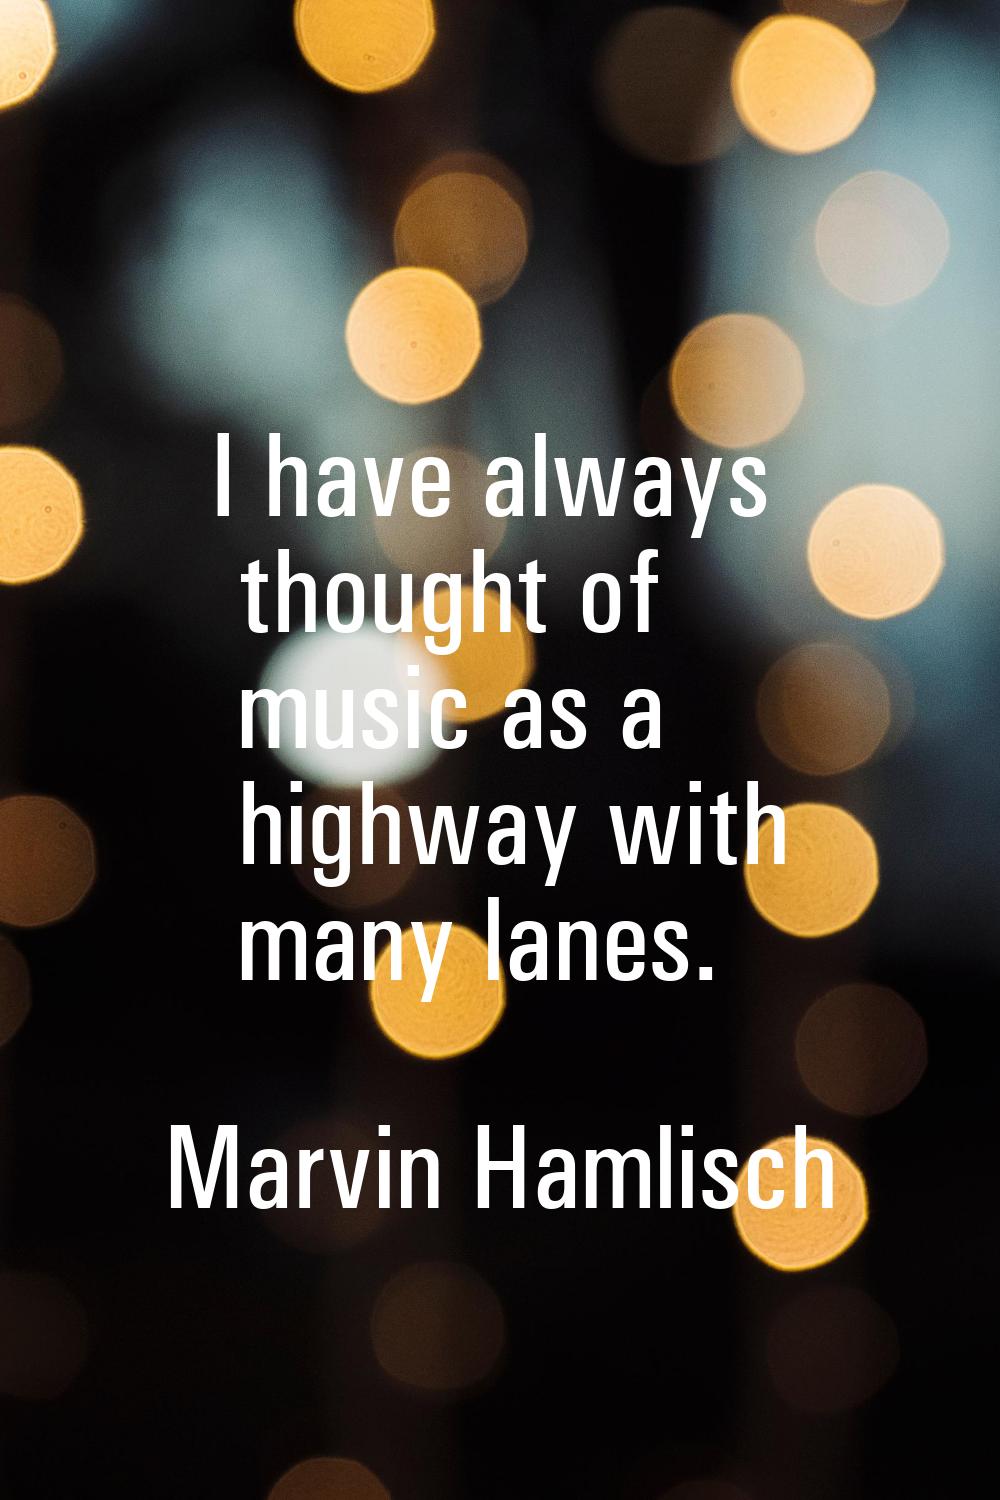 I have always thought of music as a highway with many lanes.